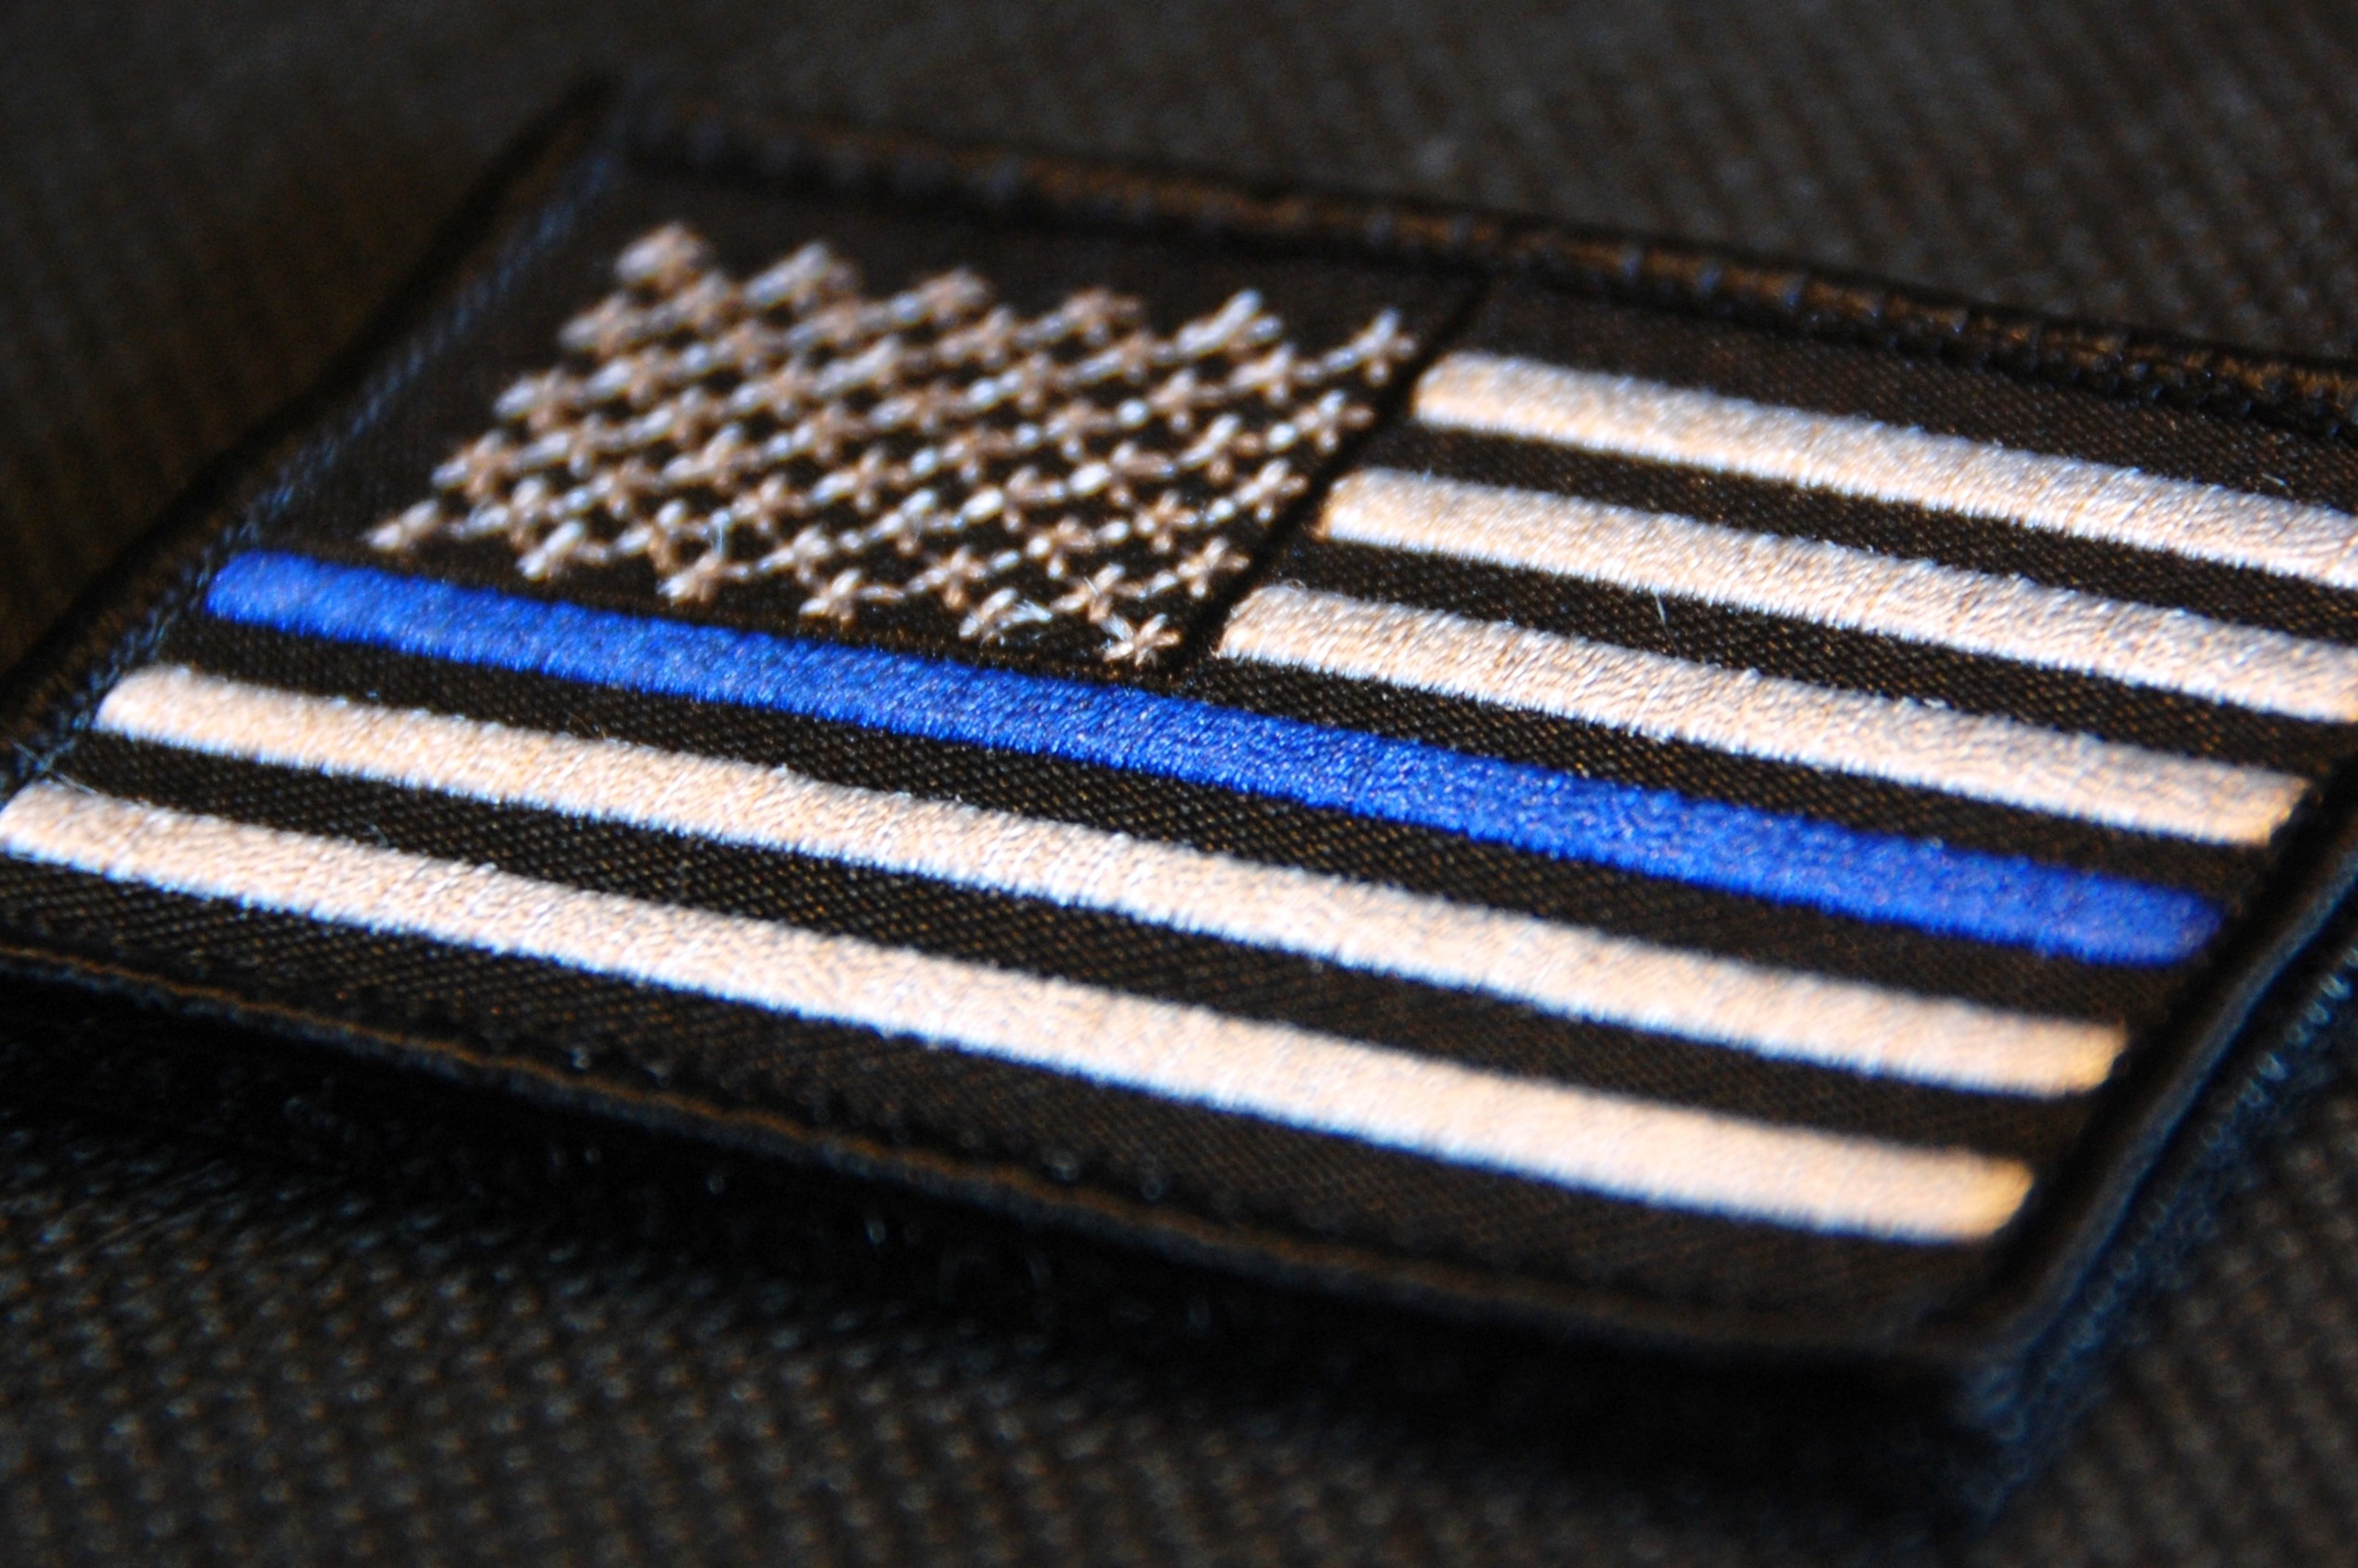 2538x1688 Displaying 16> Images For - Thin Blue Line Flag.